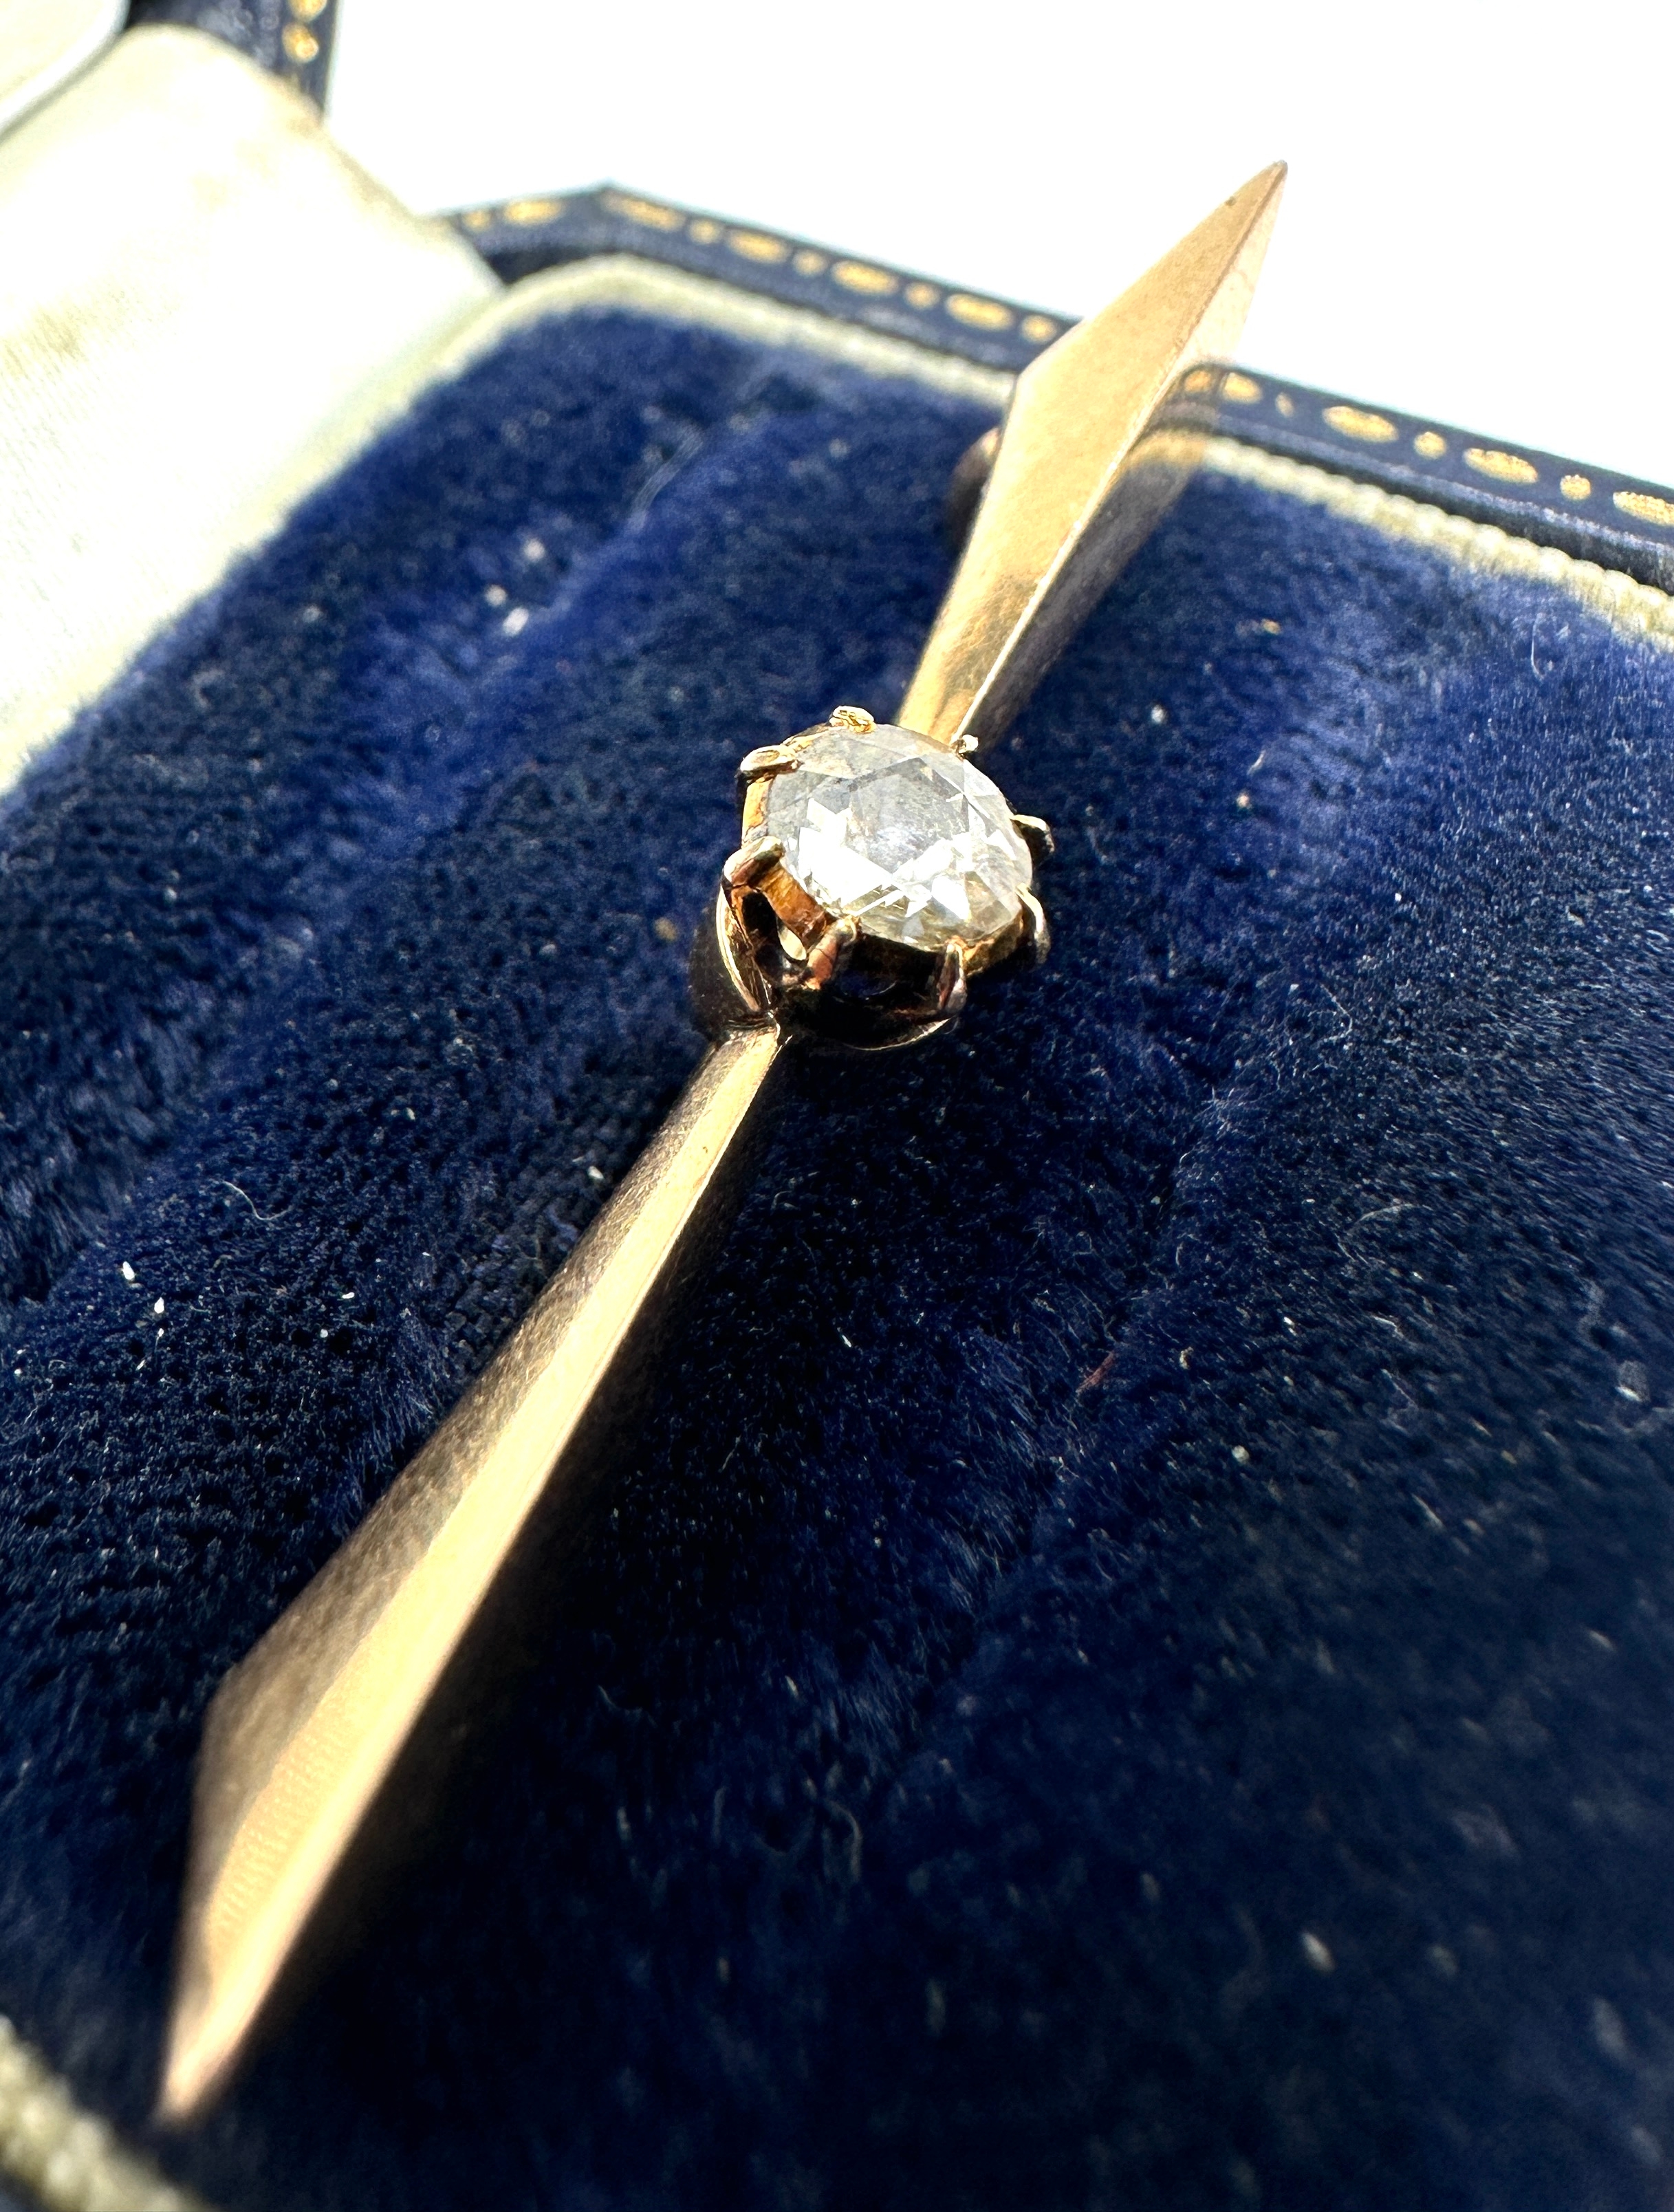 Antique 14ct gold old cut diamond ring set with central diamond that measures approx 4mm diameter - Image 2 of 6